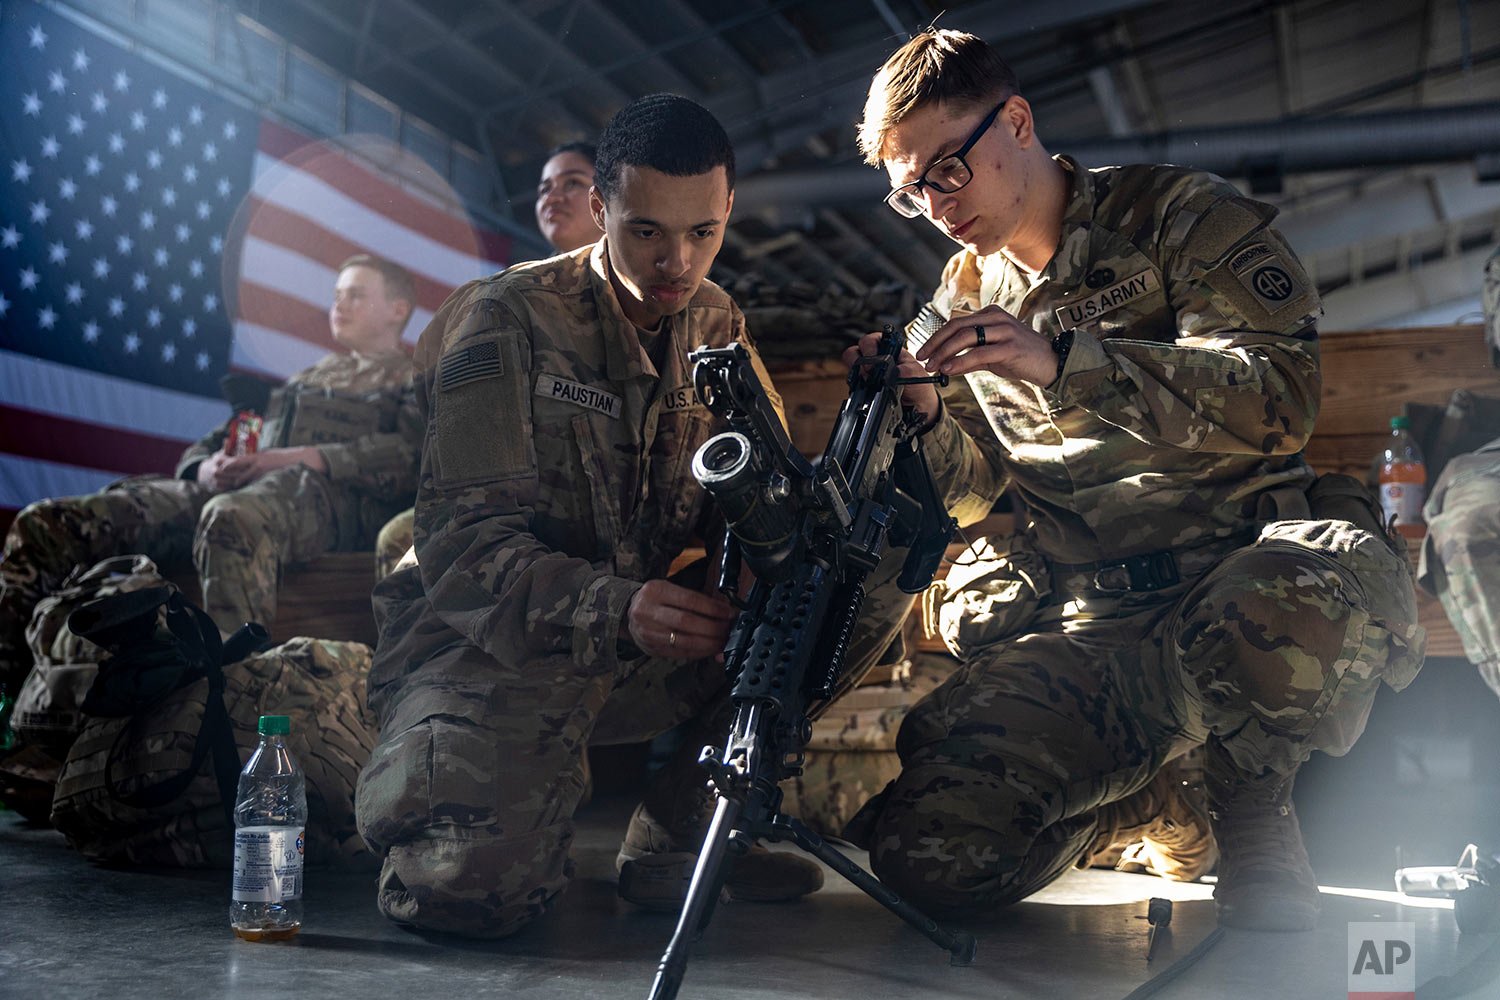  Members of the 82nd Airborne Division of the U.S. Army clean weaponry ahead of deployment to Poland from Fort Bragg, N.C. on Monday, Feb. 14, 2022. They are among soldiers the Department of Defense is sending in a demonstration of American commitmen